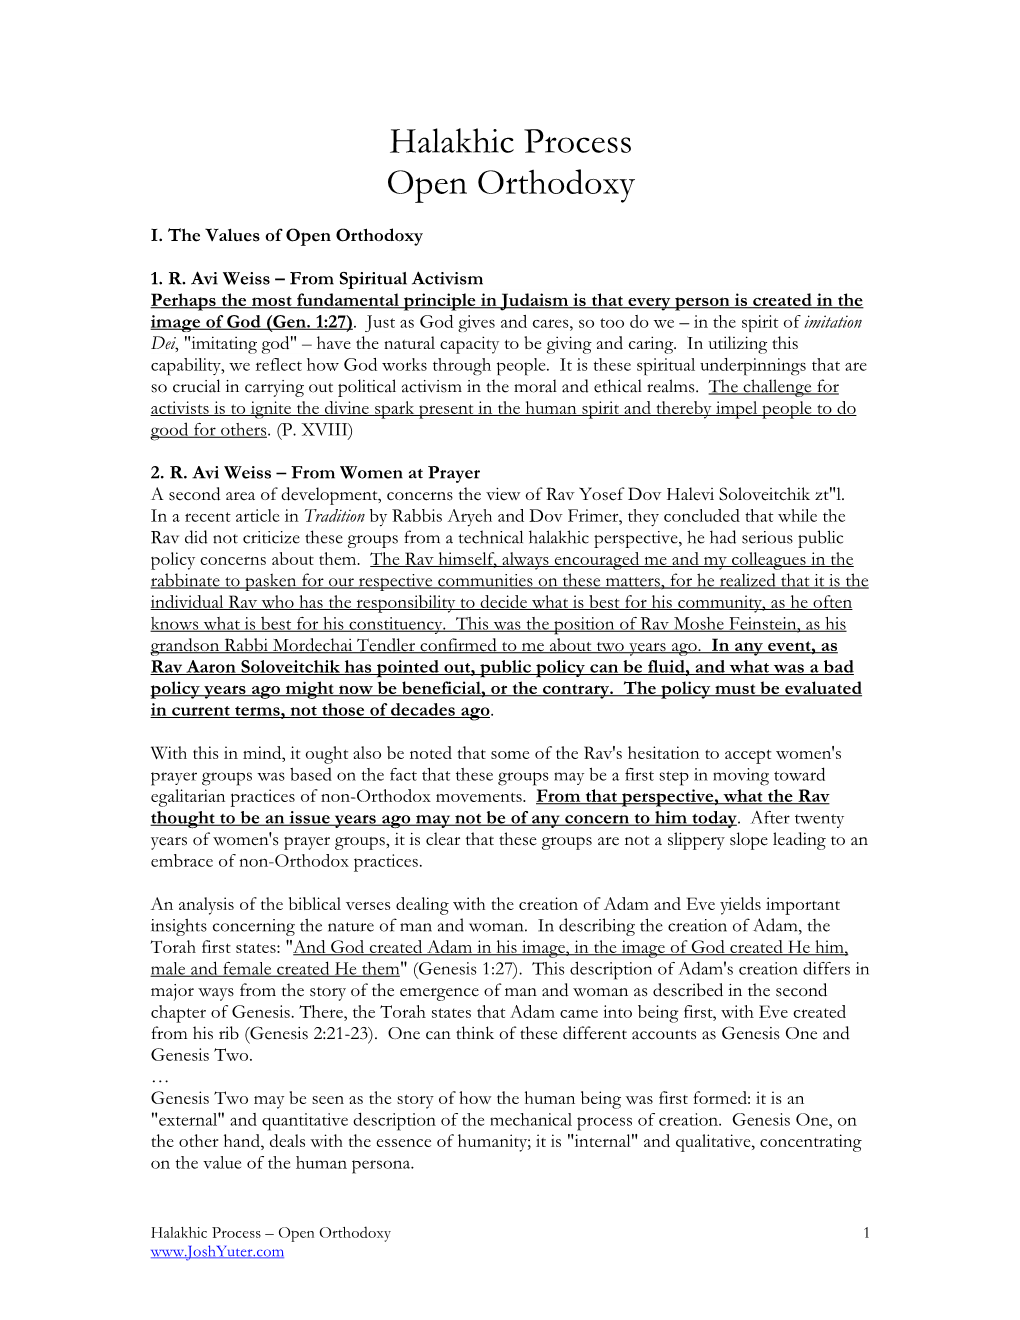 Halakhic Process 25 – Open Orthodoxy Sources